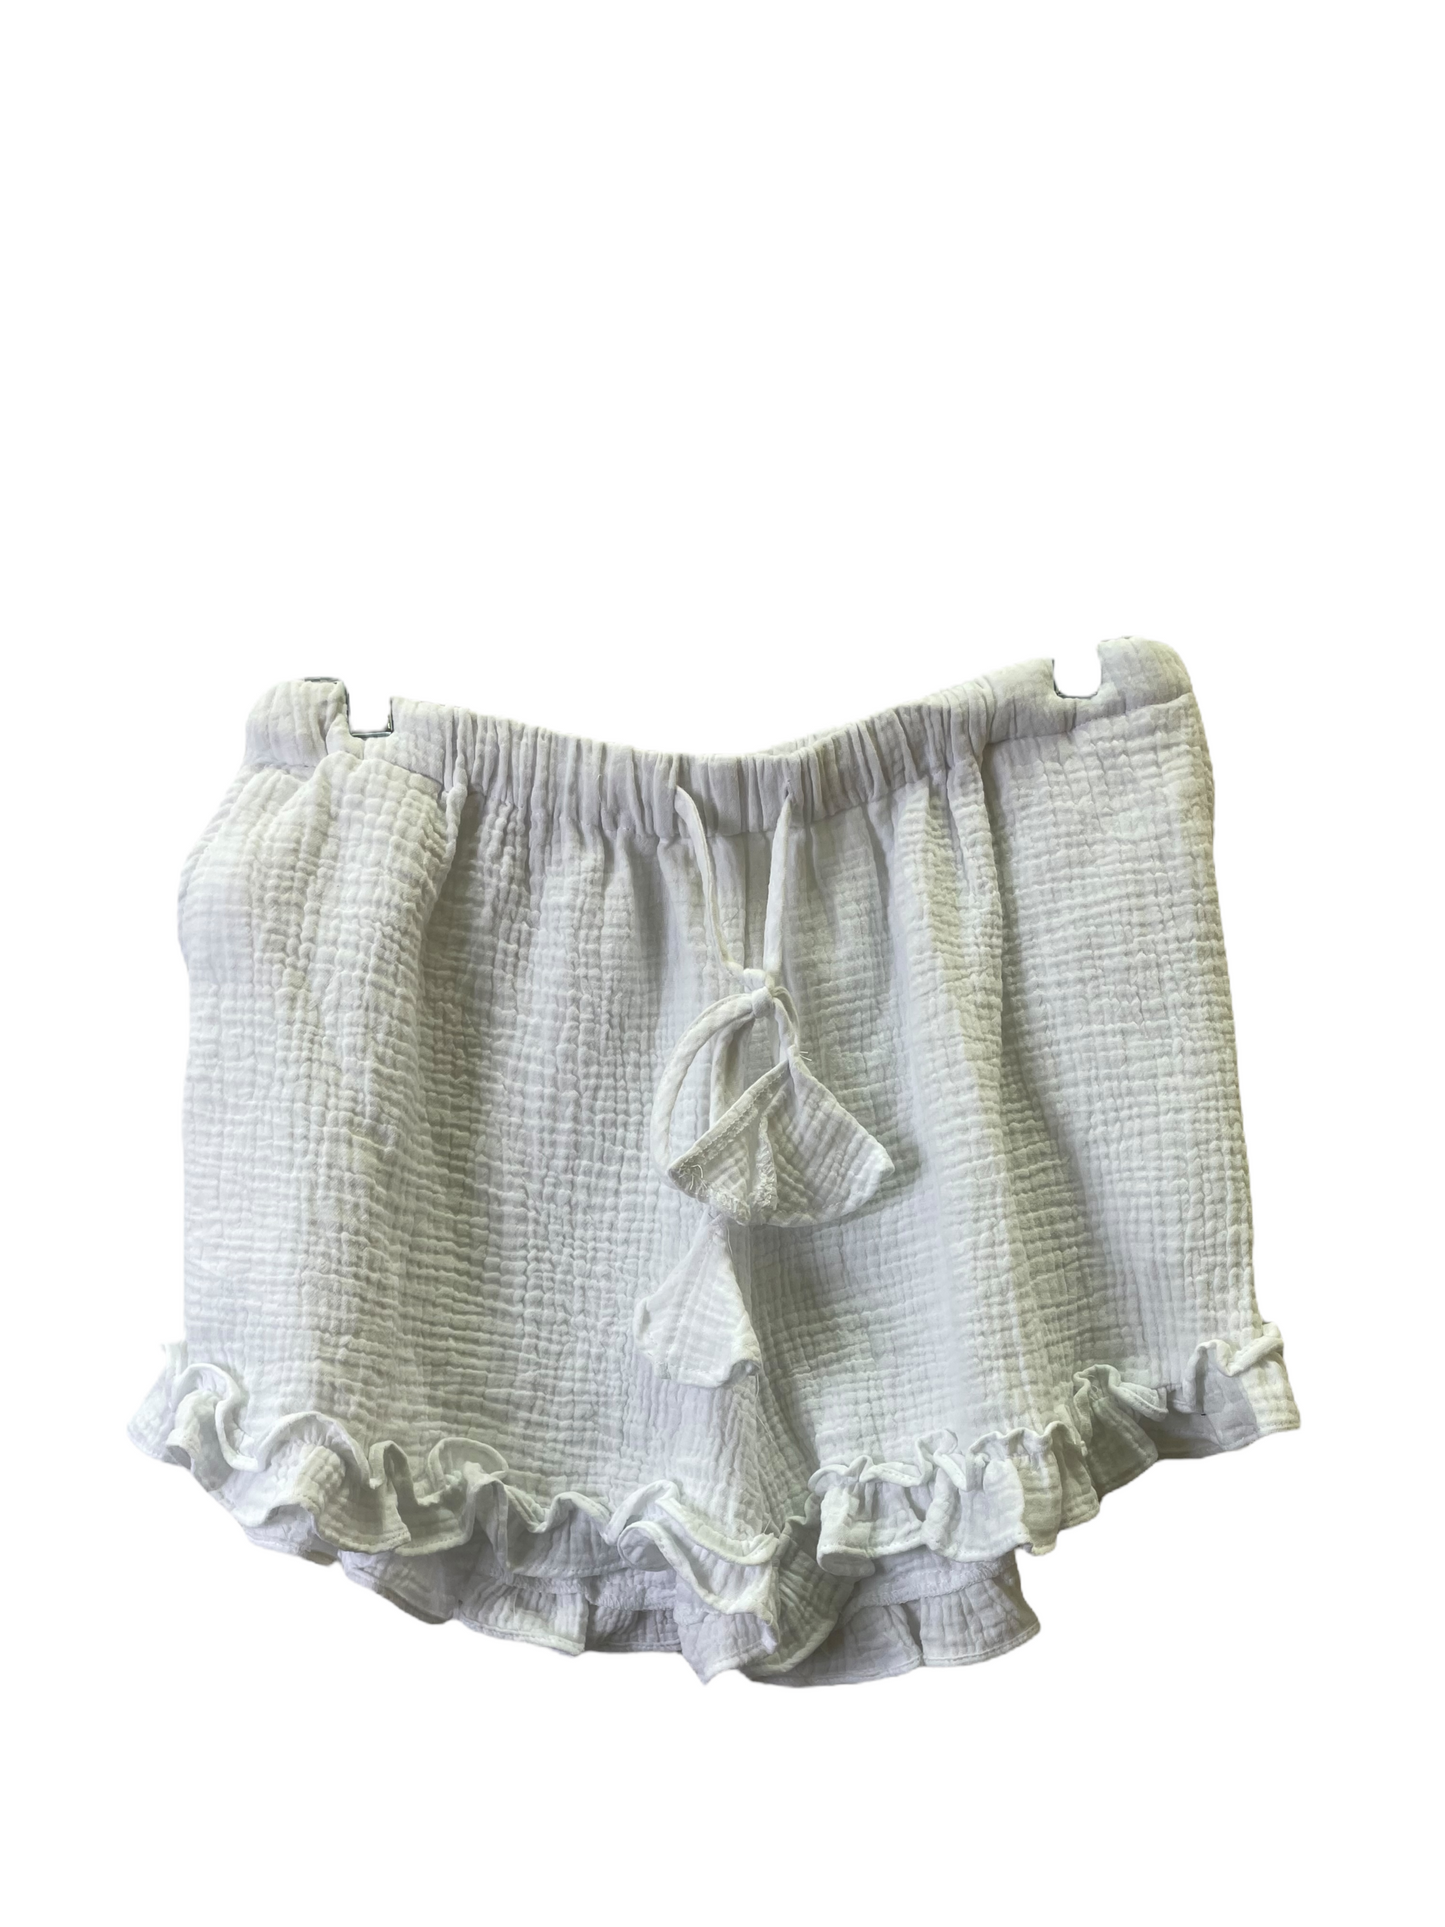 Shorts By Joie  Size: L